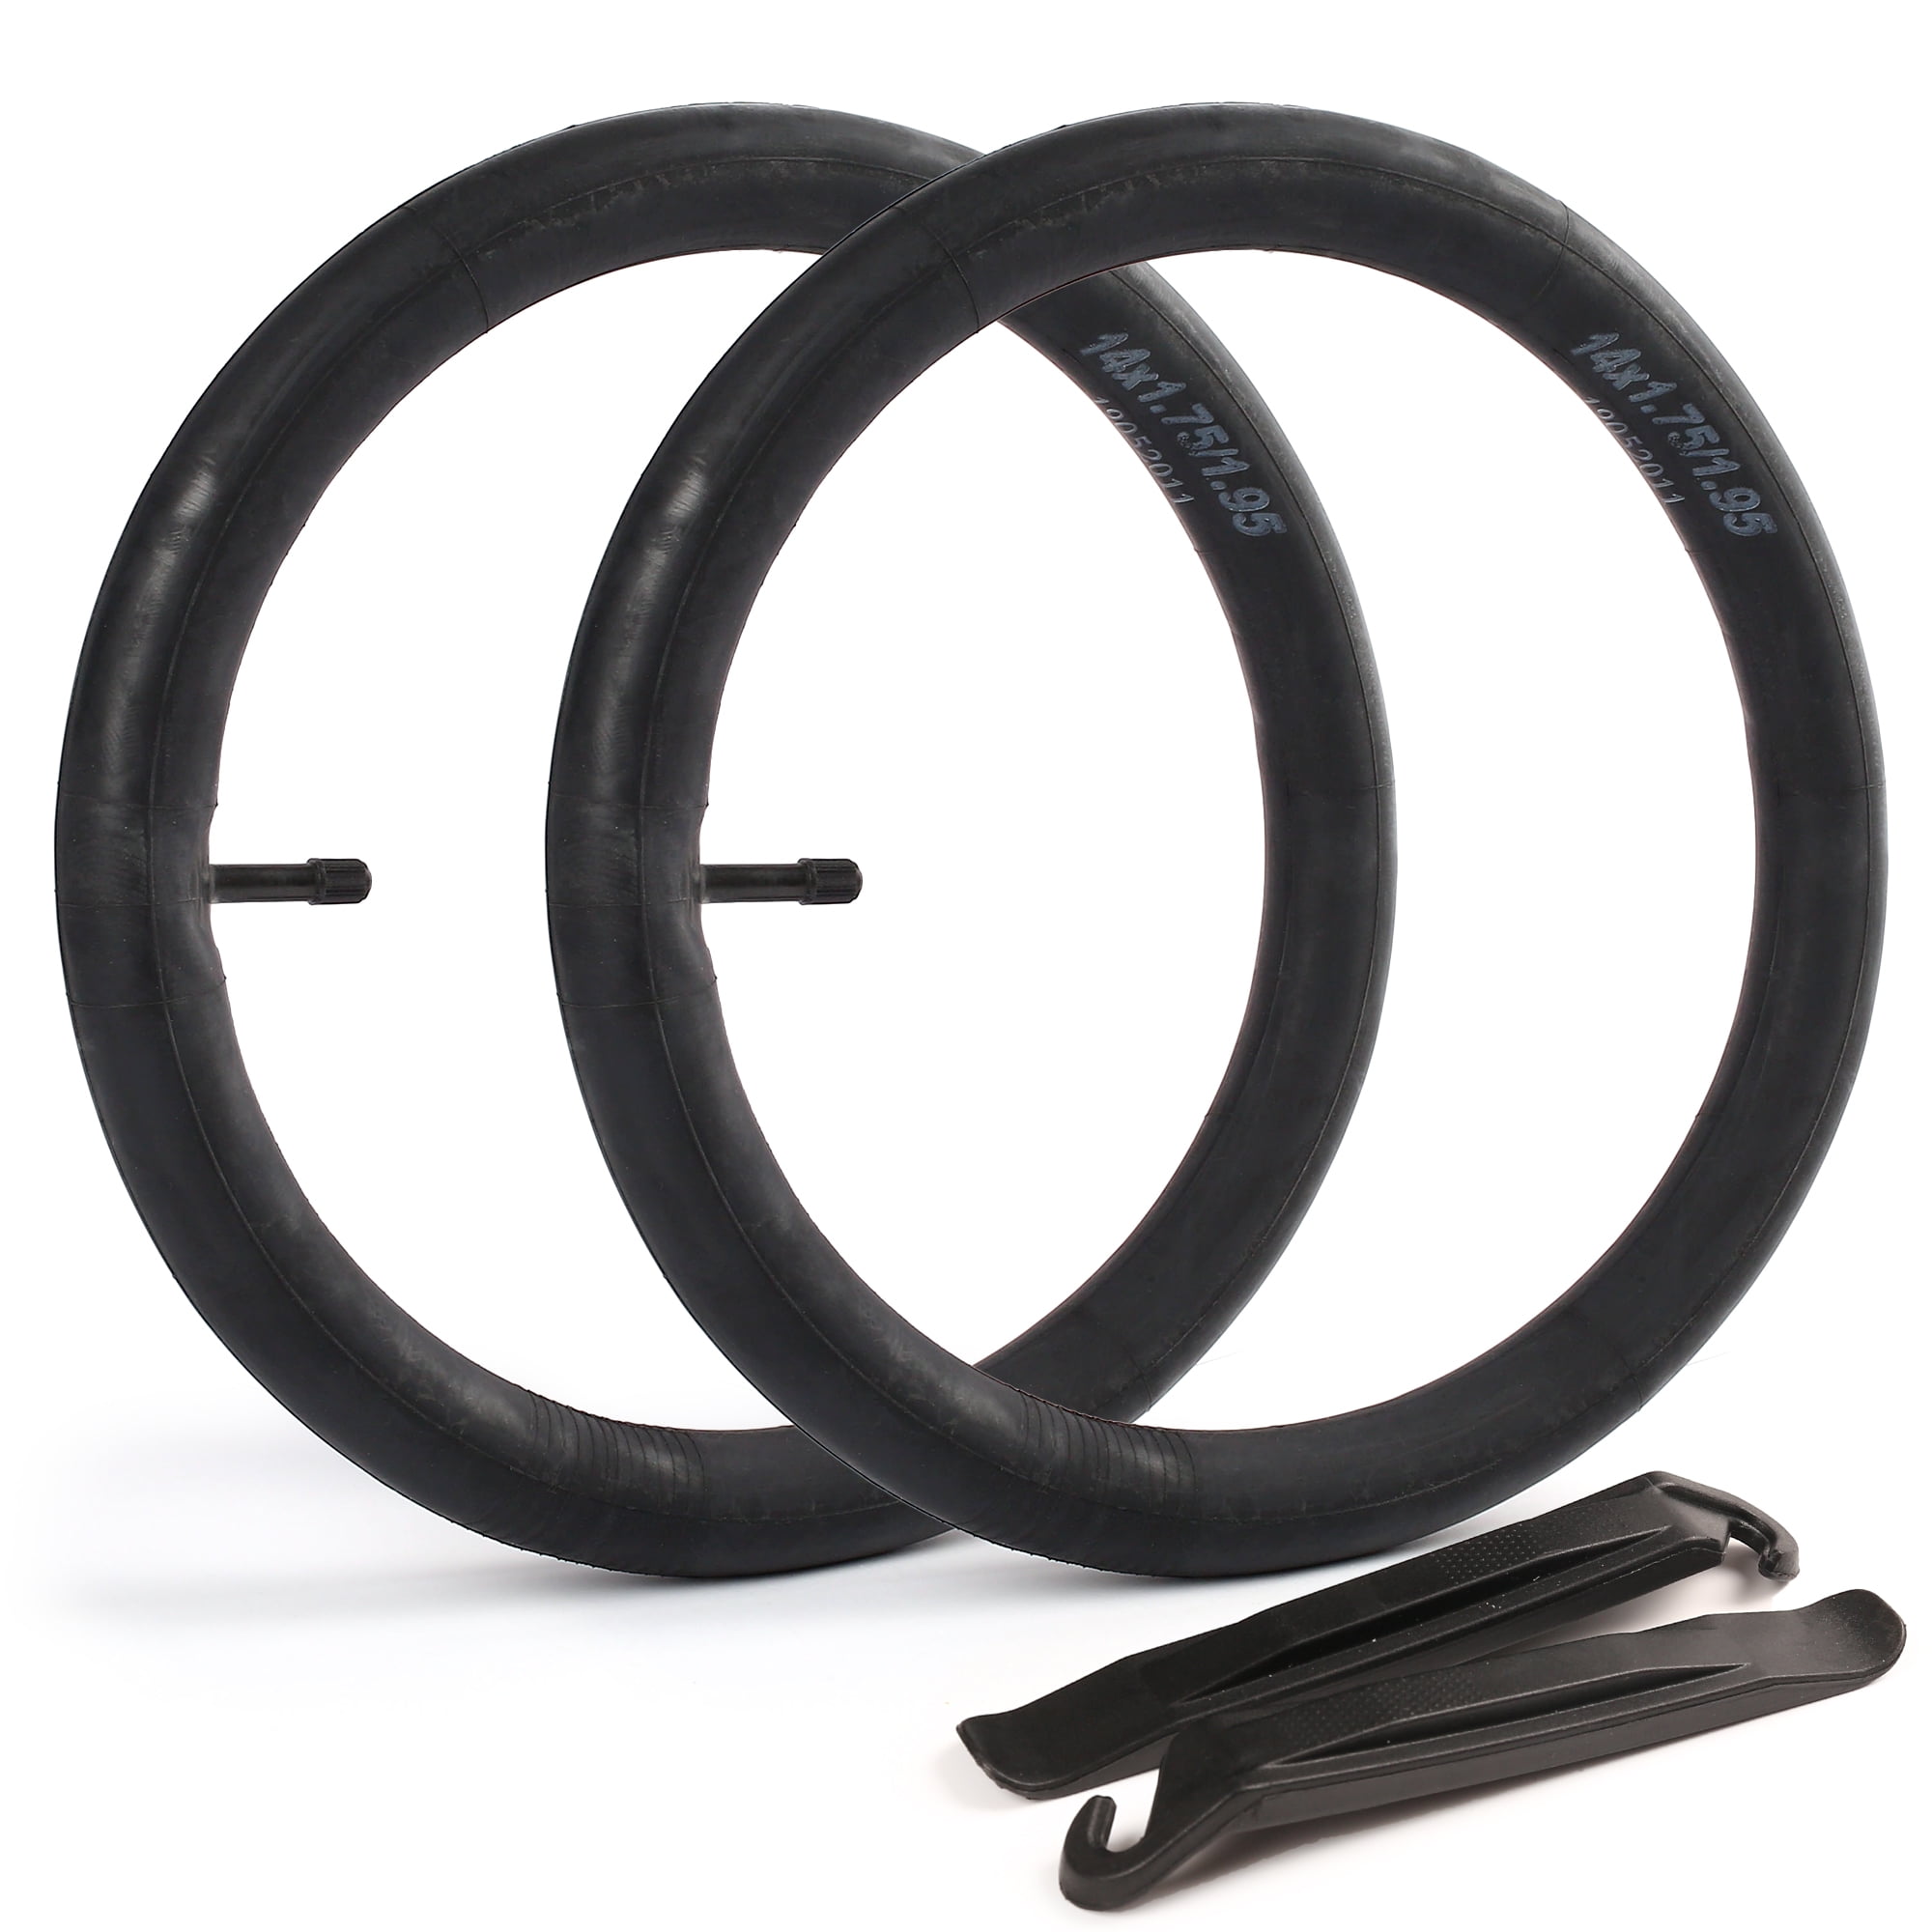 2pcs 700cx25 or 35 Thorn Protection Bike Tires Black Slick Type Heavy Duty 